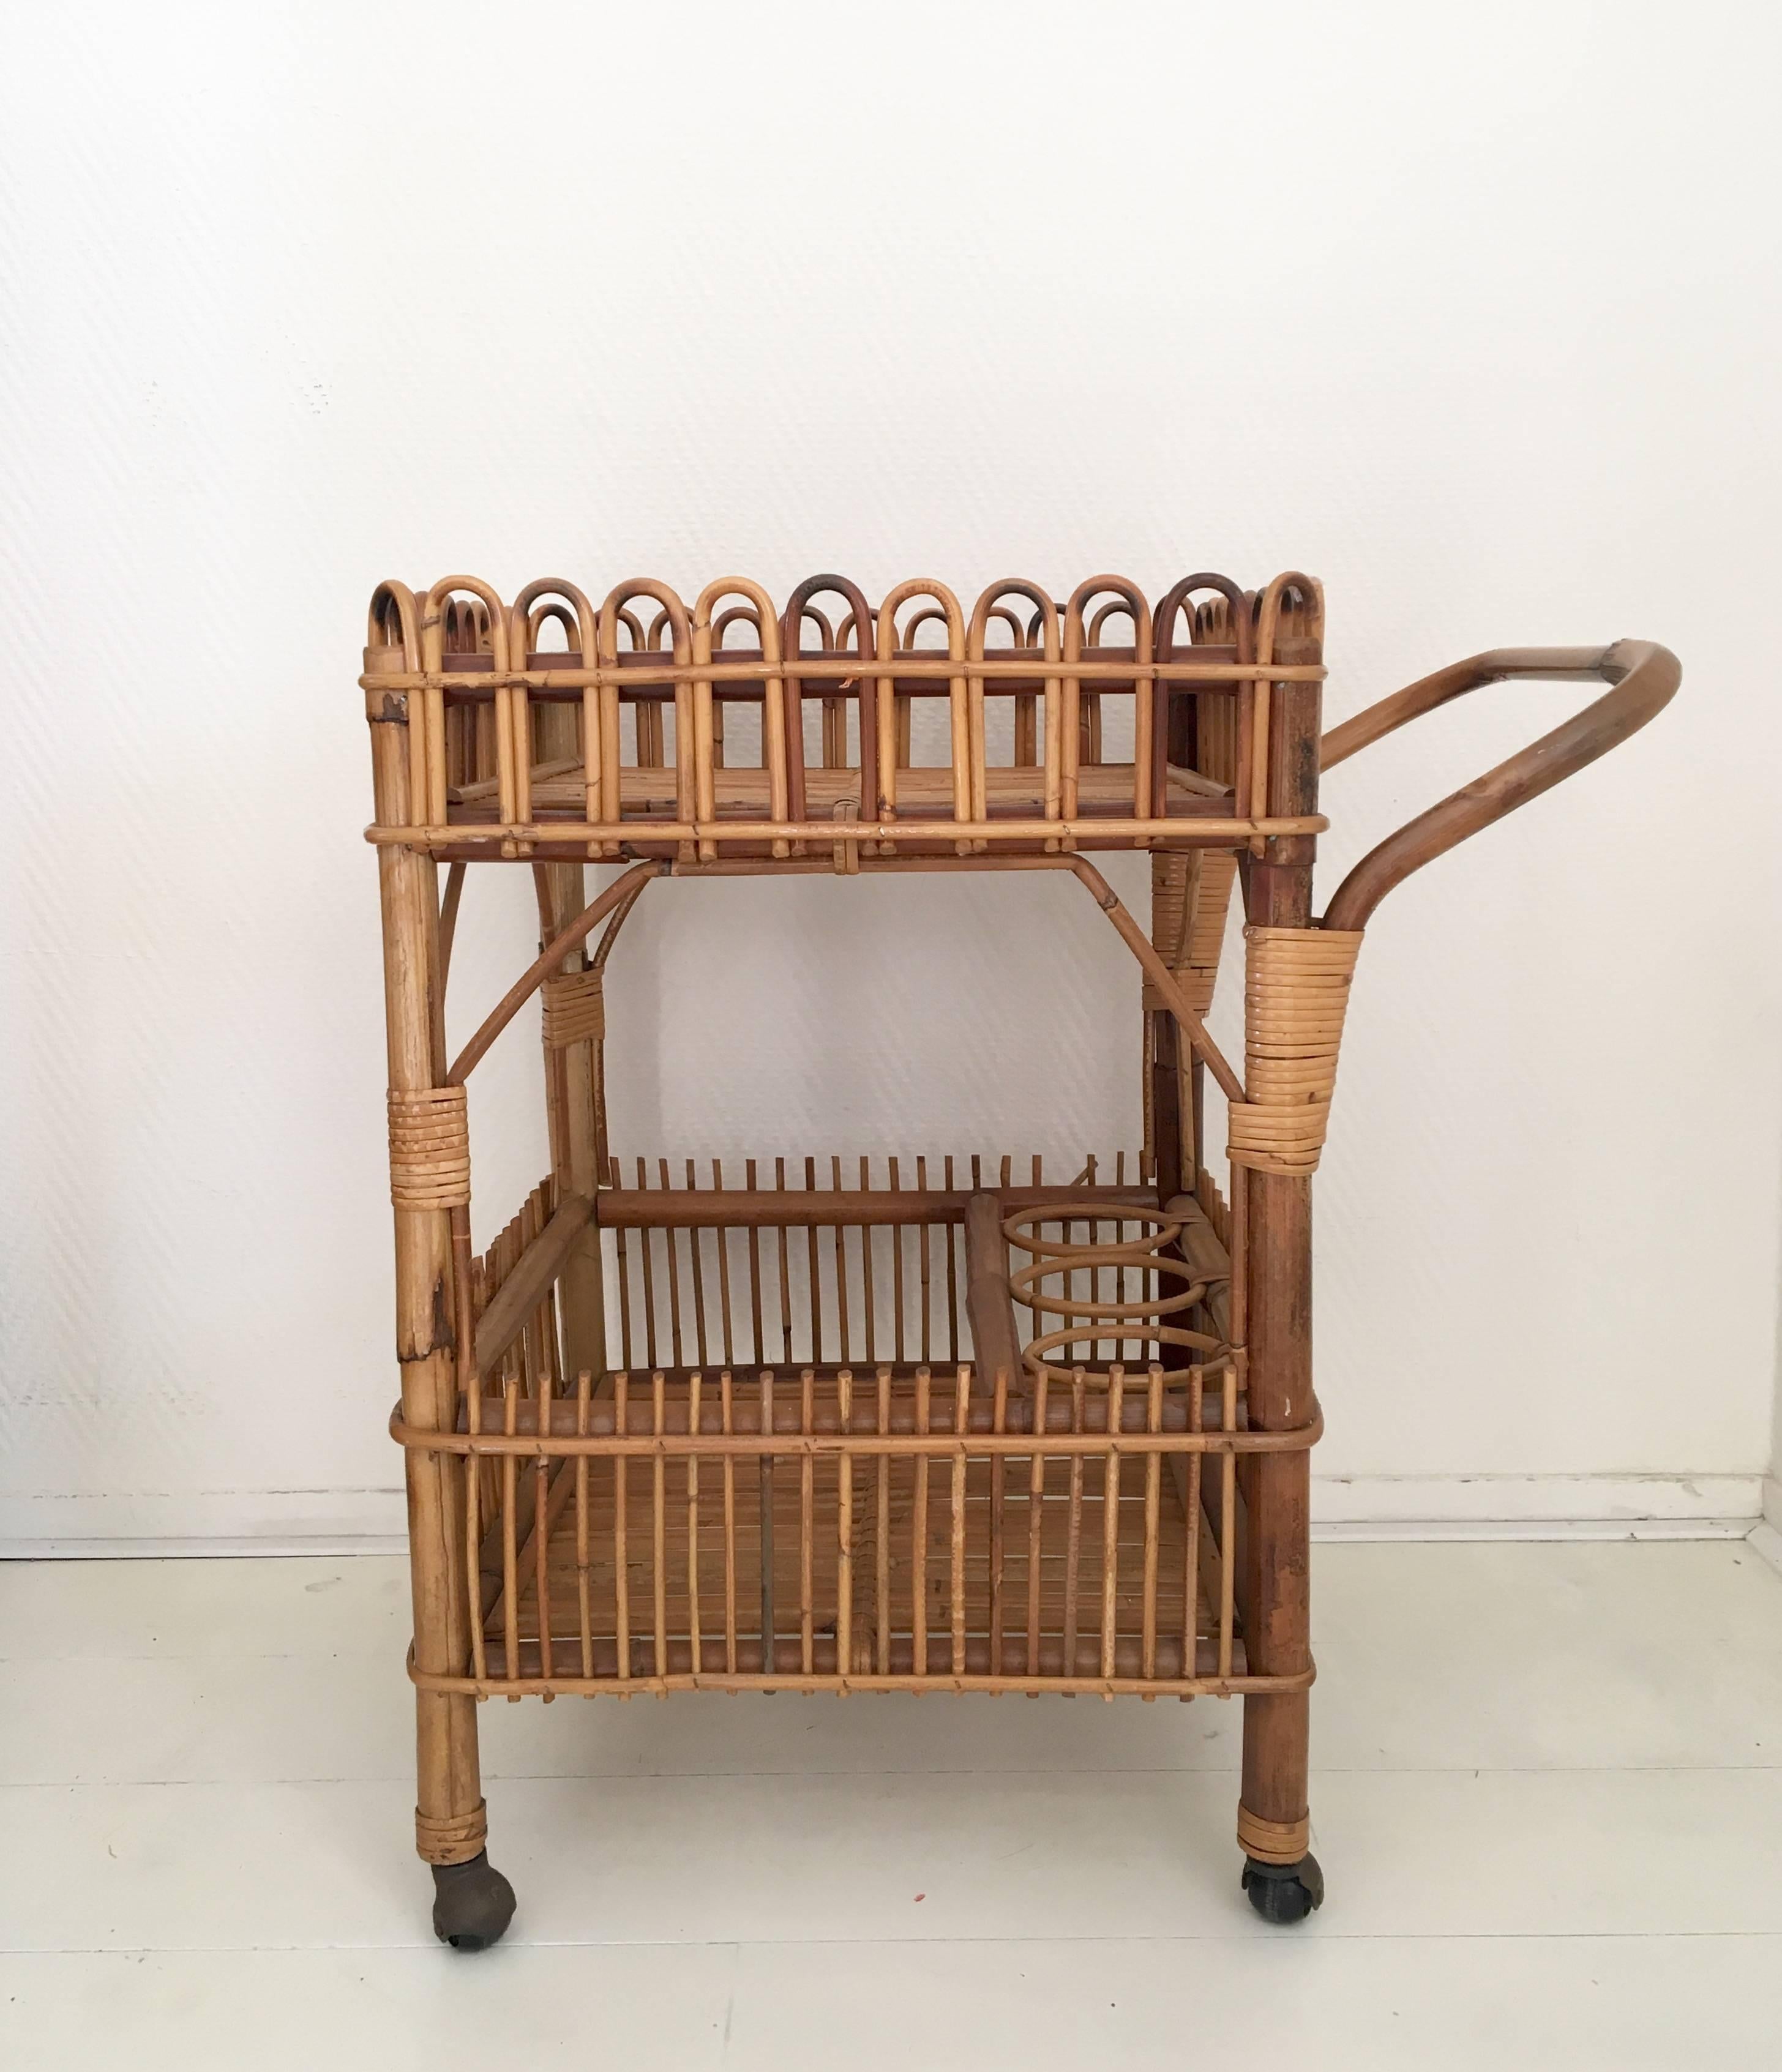 This unusual wonderful trolley was designed and manufactured in Europe, circa 1960s. It can store tree bottles and still offers enough space for other items. This trolley remains in very good condition for it's age. Some signs of age and use.